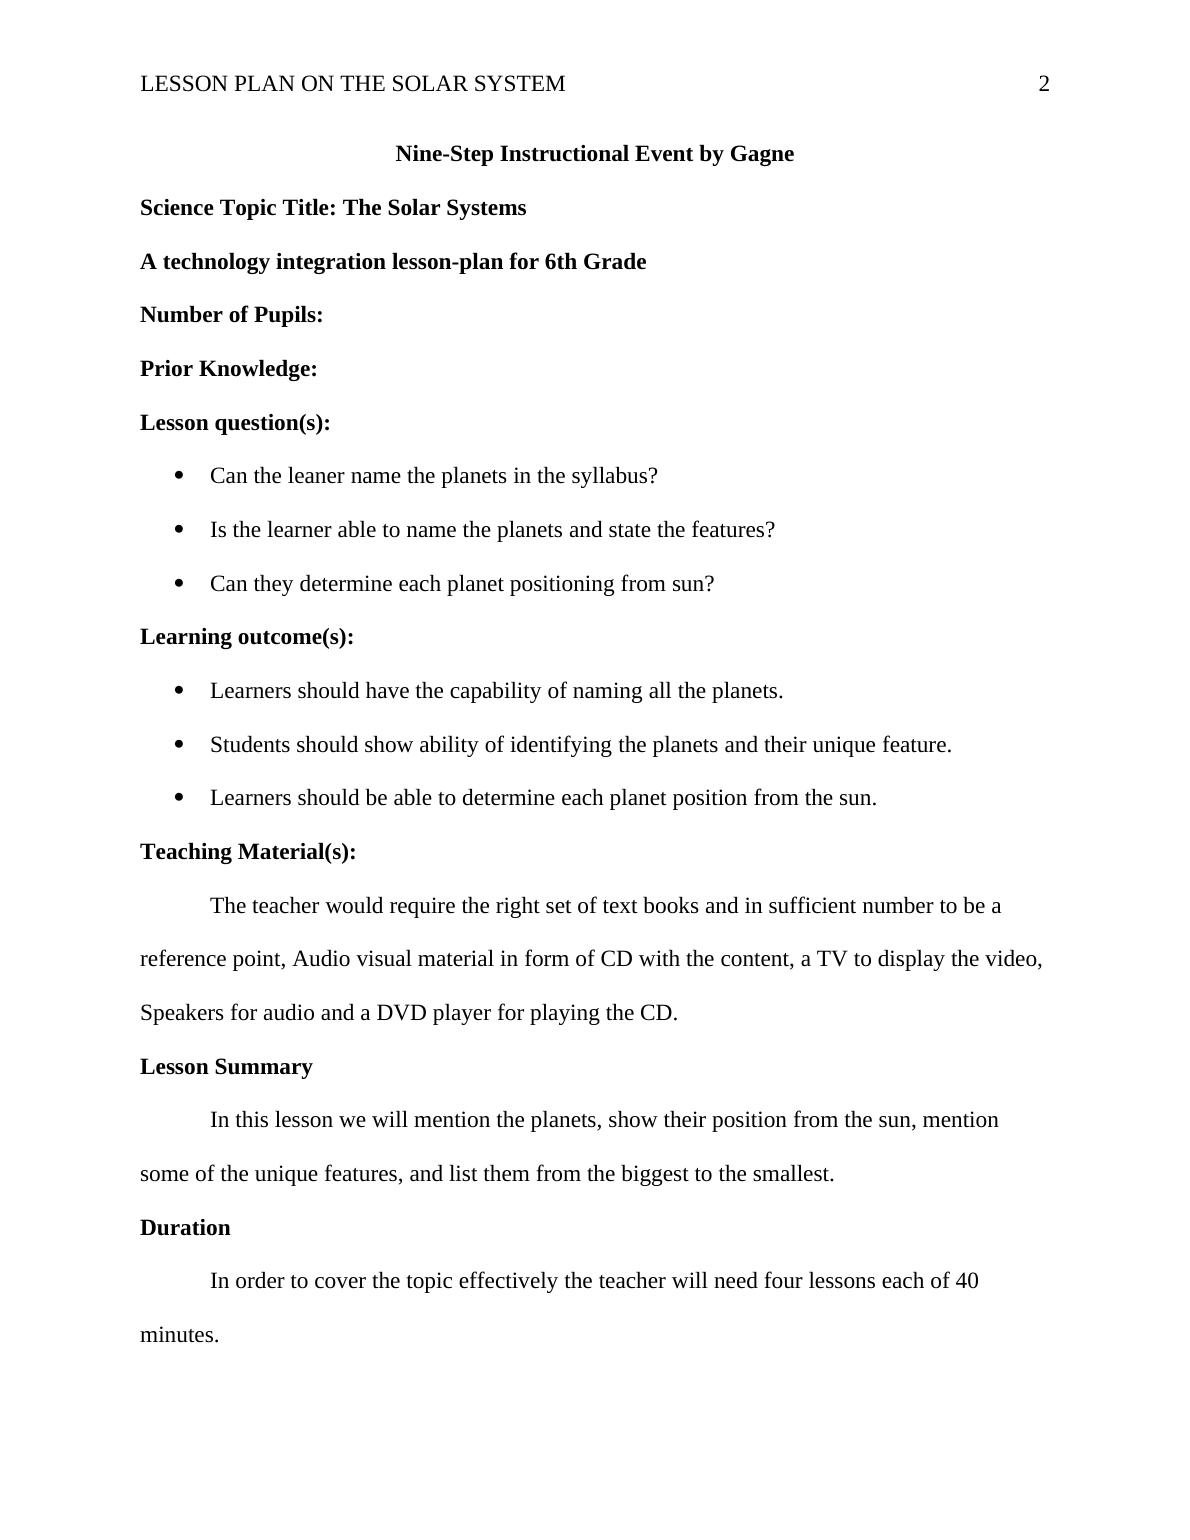 Solar Systems Lesson Plan Assignment 2022_2